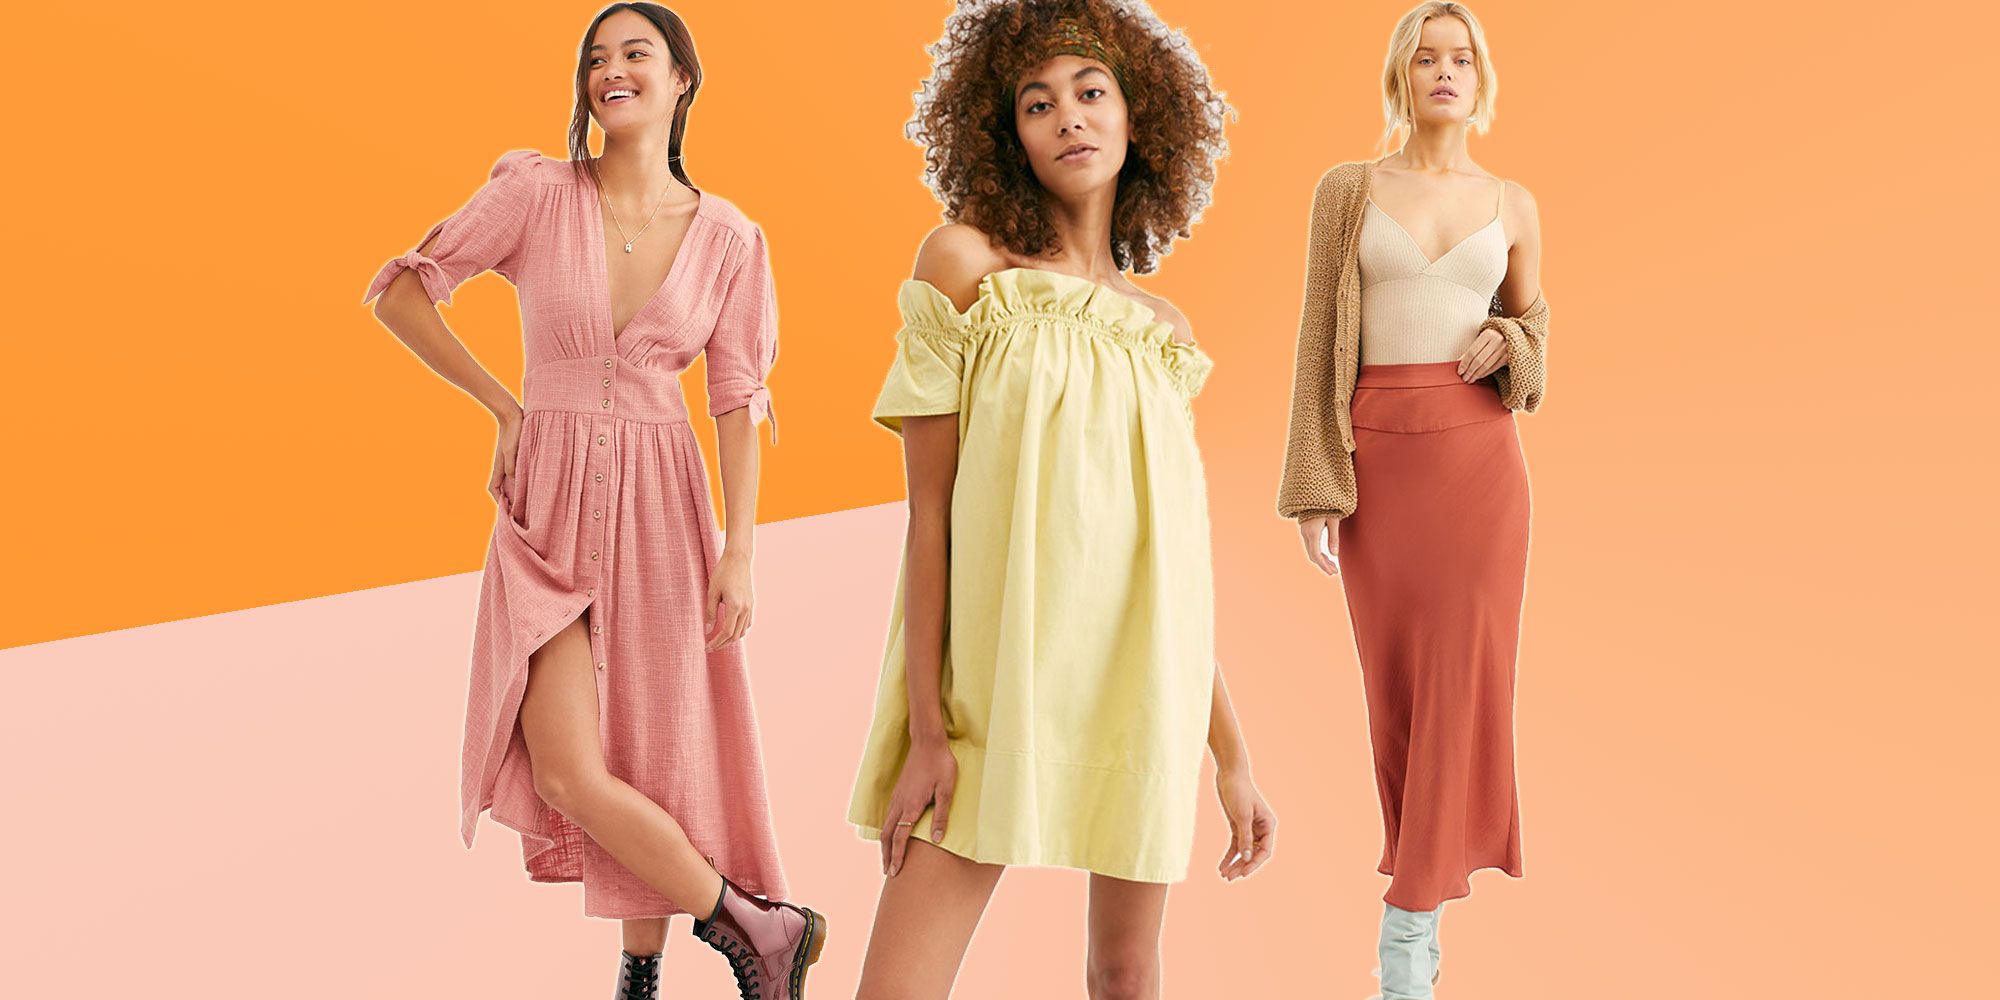 Free People: The 19 best styles to shop online now